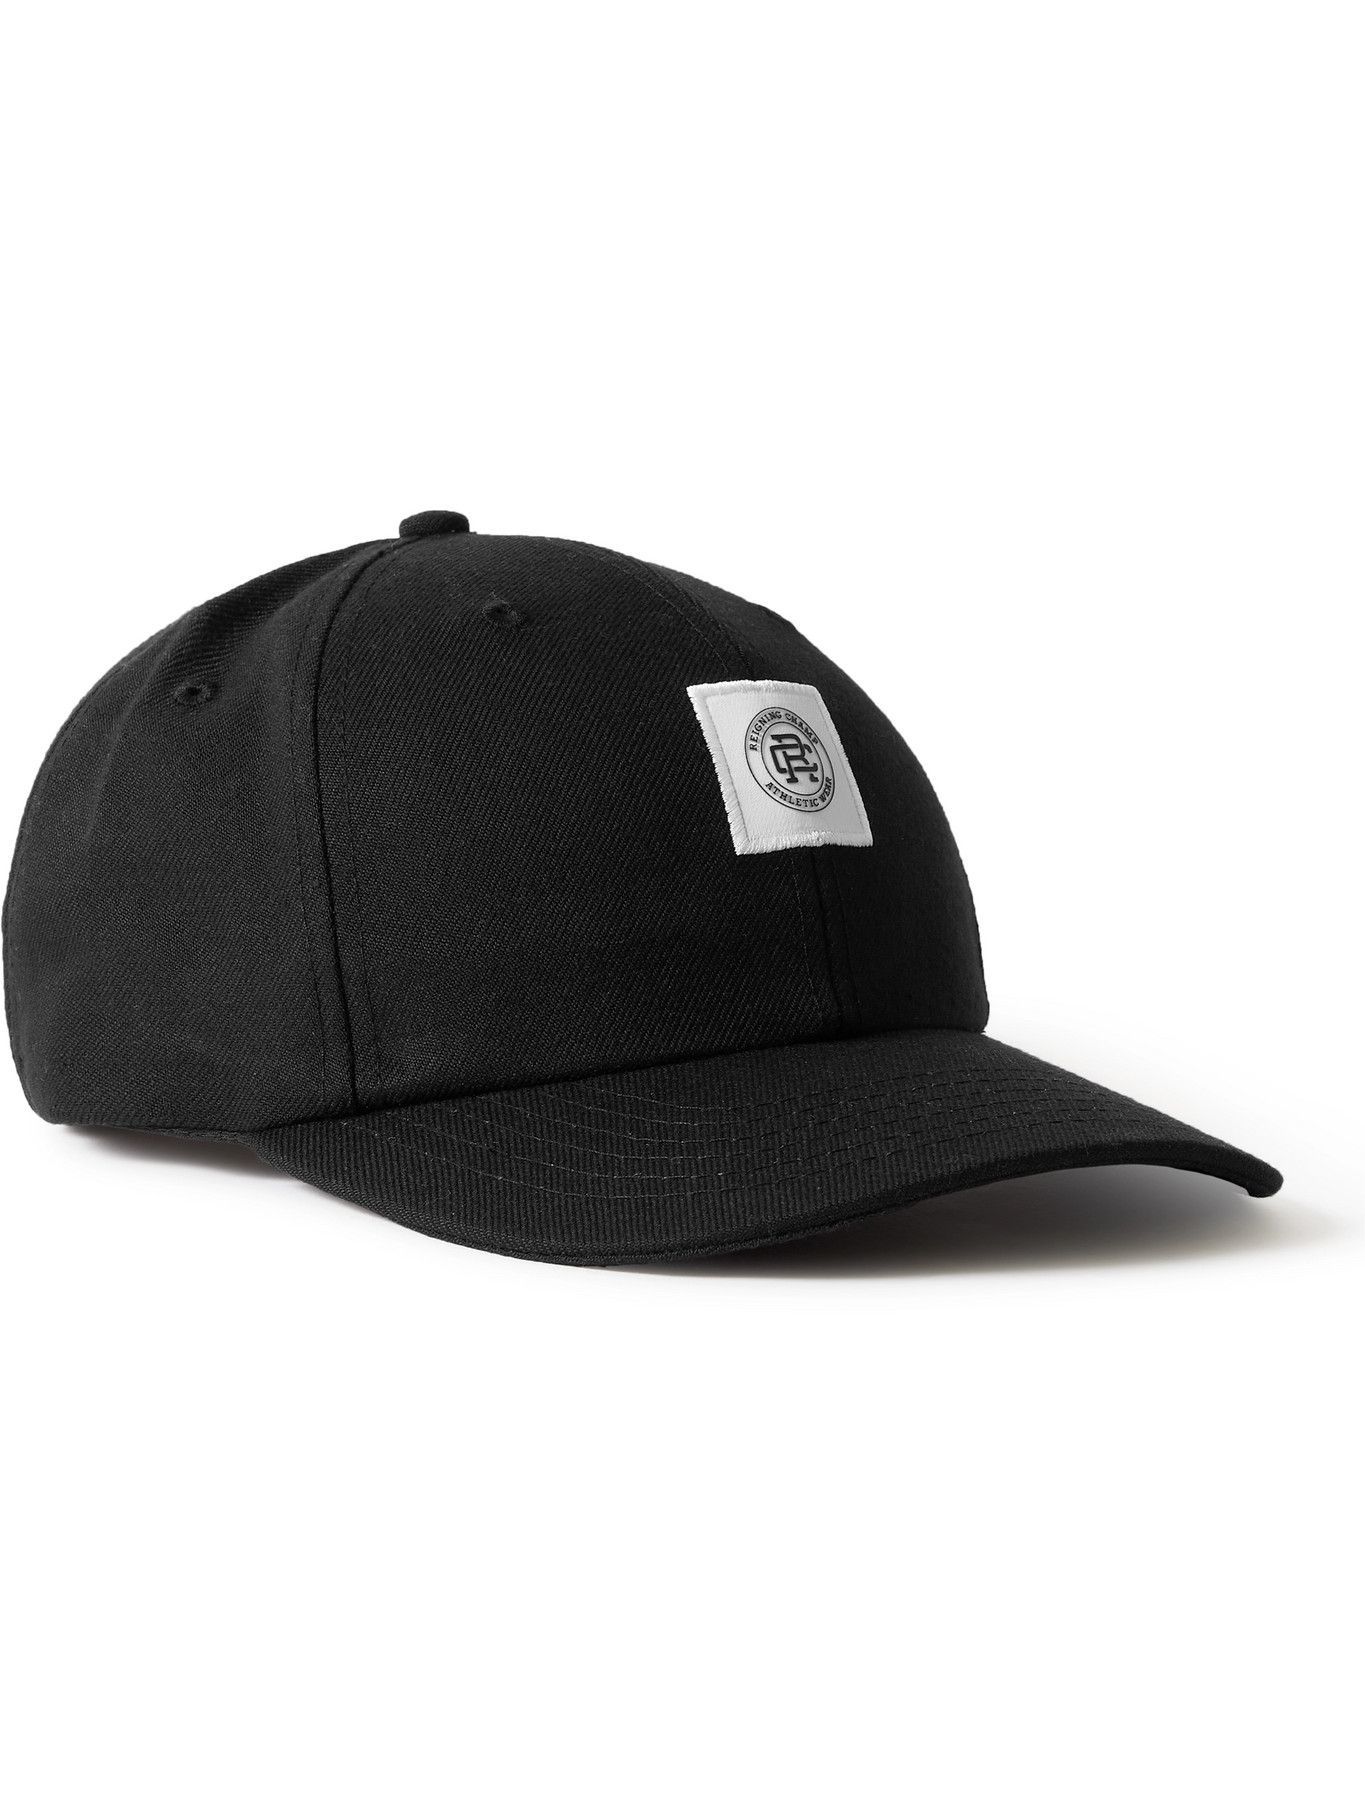 Reigning Champ 6 Panel Cap Reigning Champ